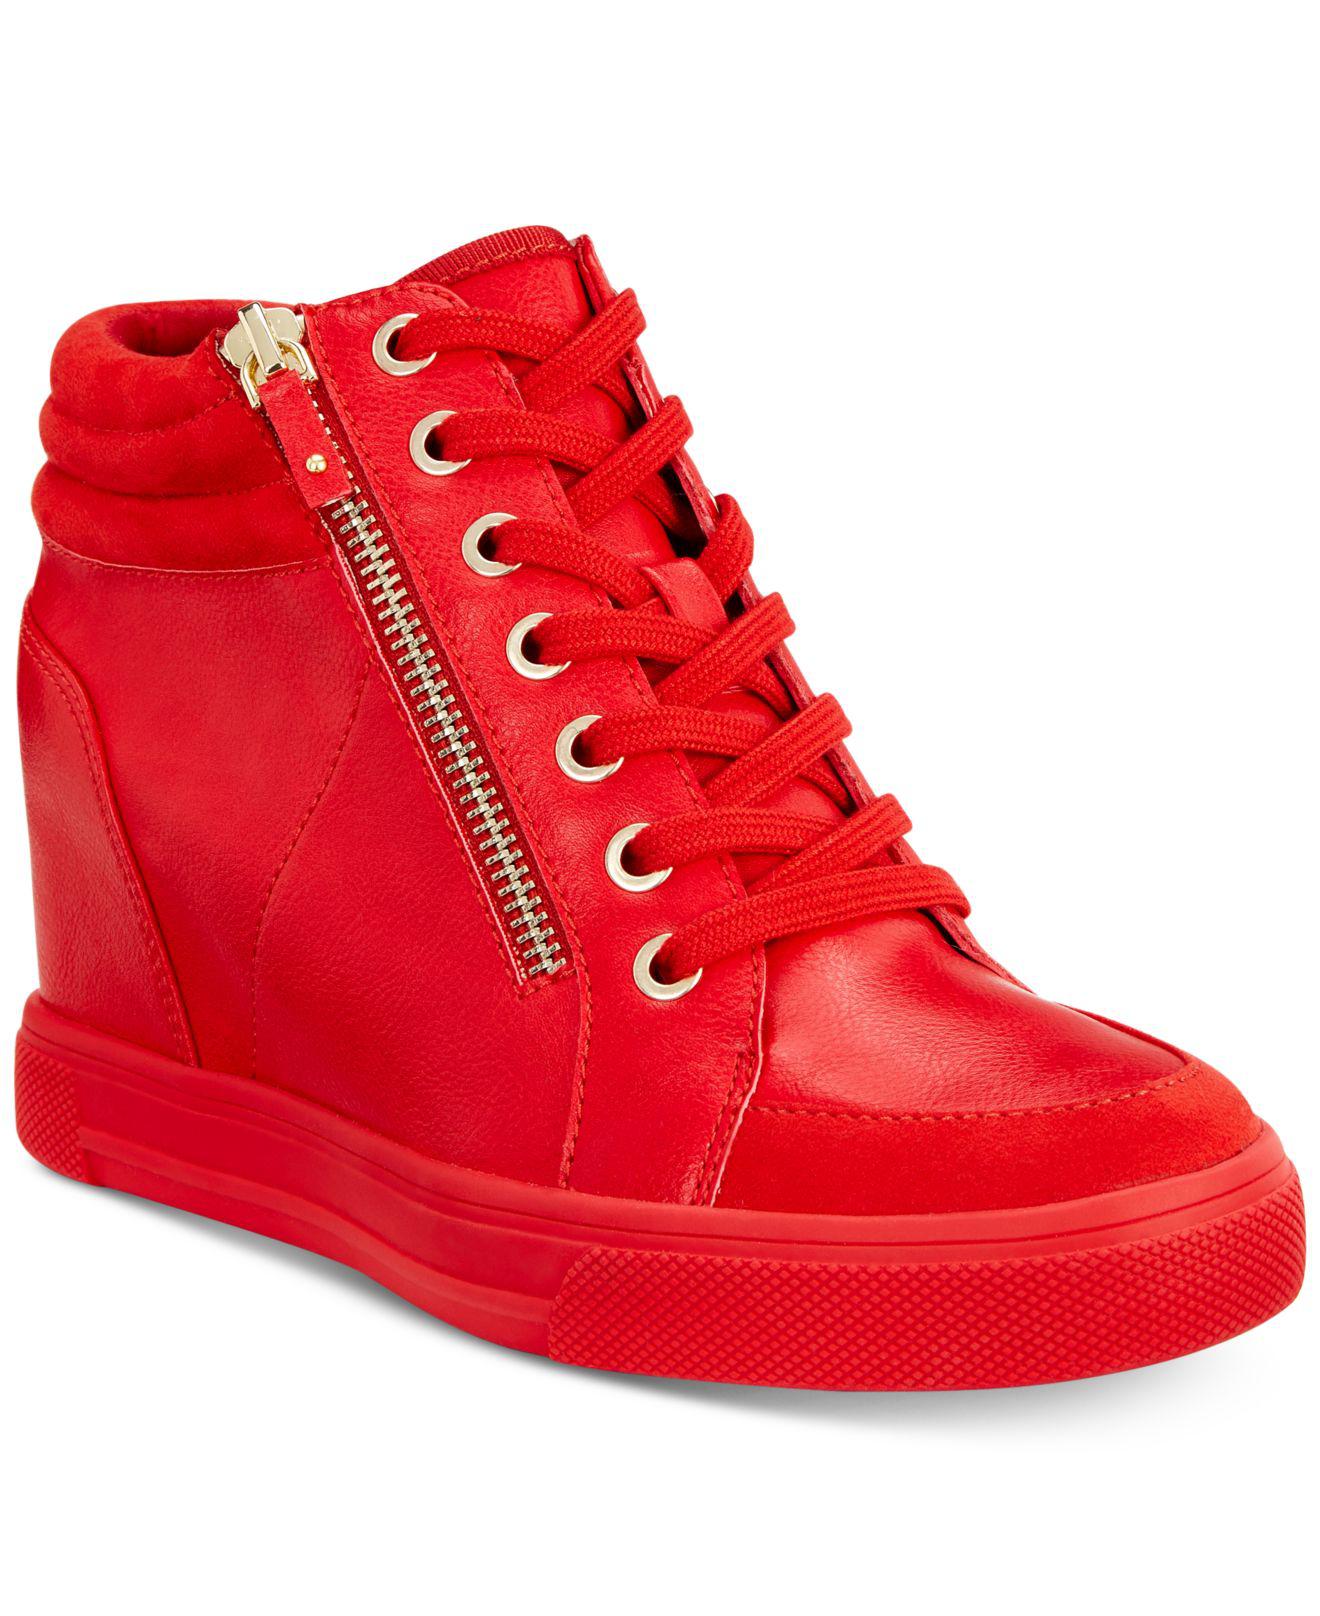 ALDO Kaia Lace-up Wedge Sneakers in Red - Lyst